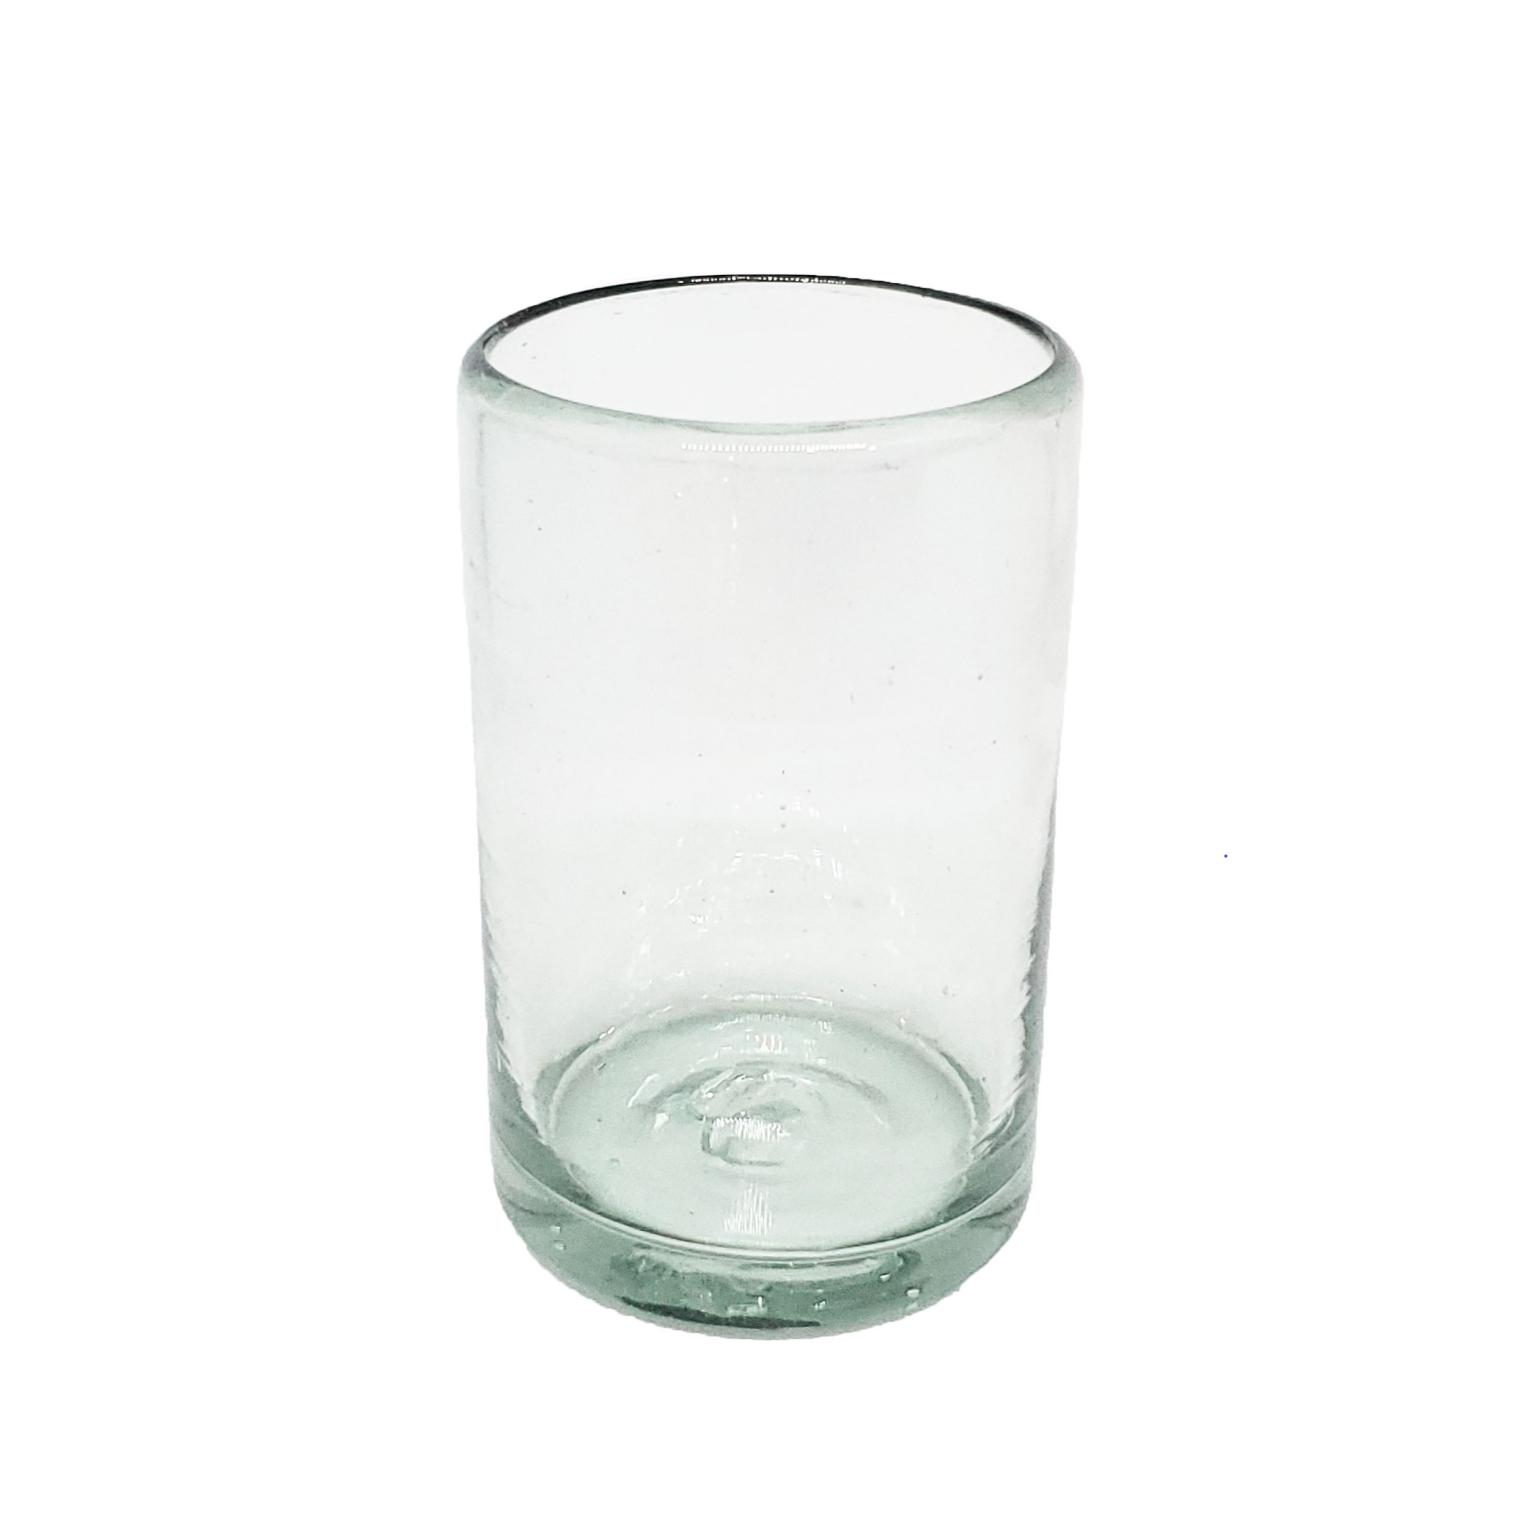 Sale Items / Clear 9 oz Juice Glasses (set of 6) / These handcrafted glasses deliver a classic touch to your favorite drink.